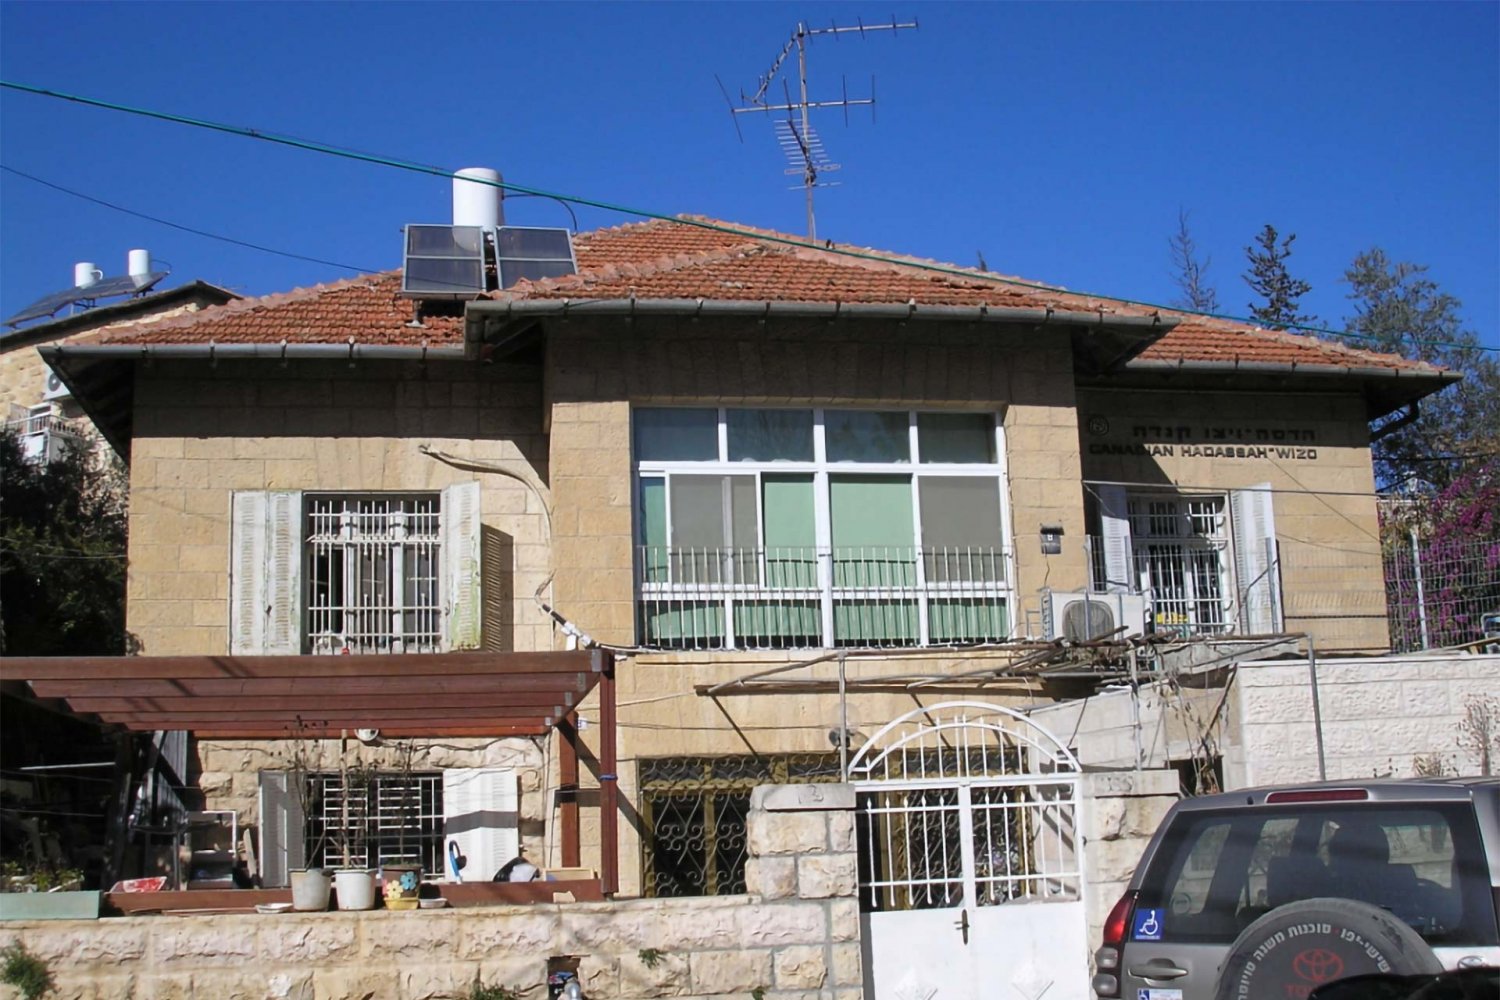 The Sakakini house in Katamon, divided into two flats, with WIZO visible on the right